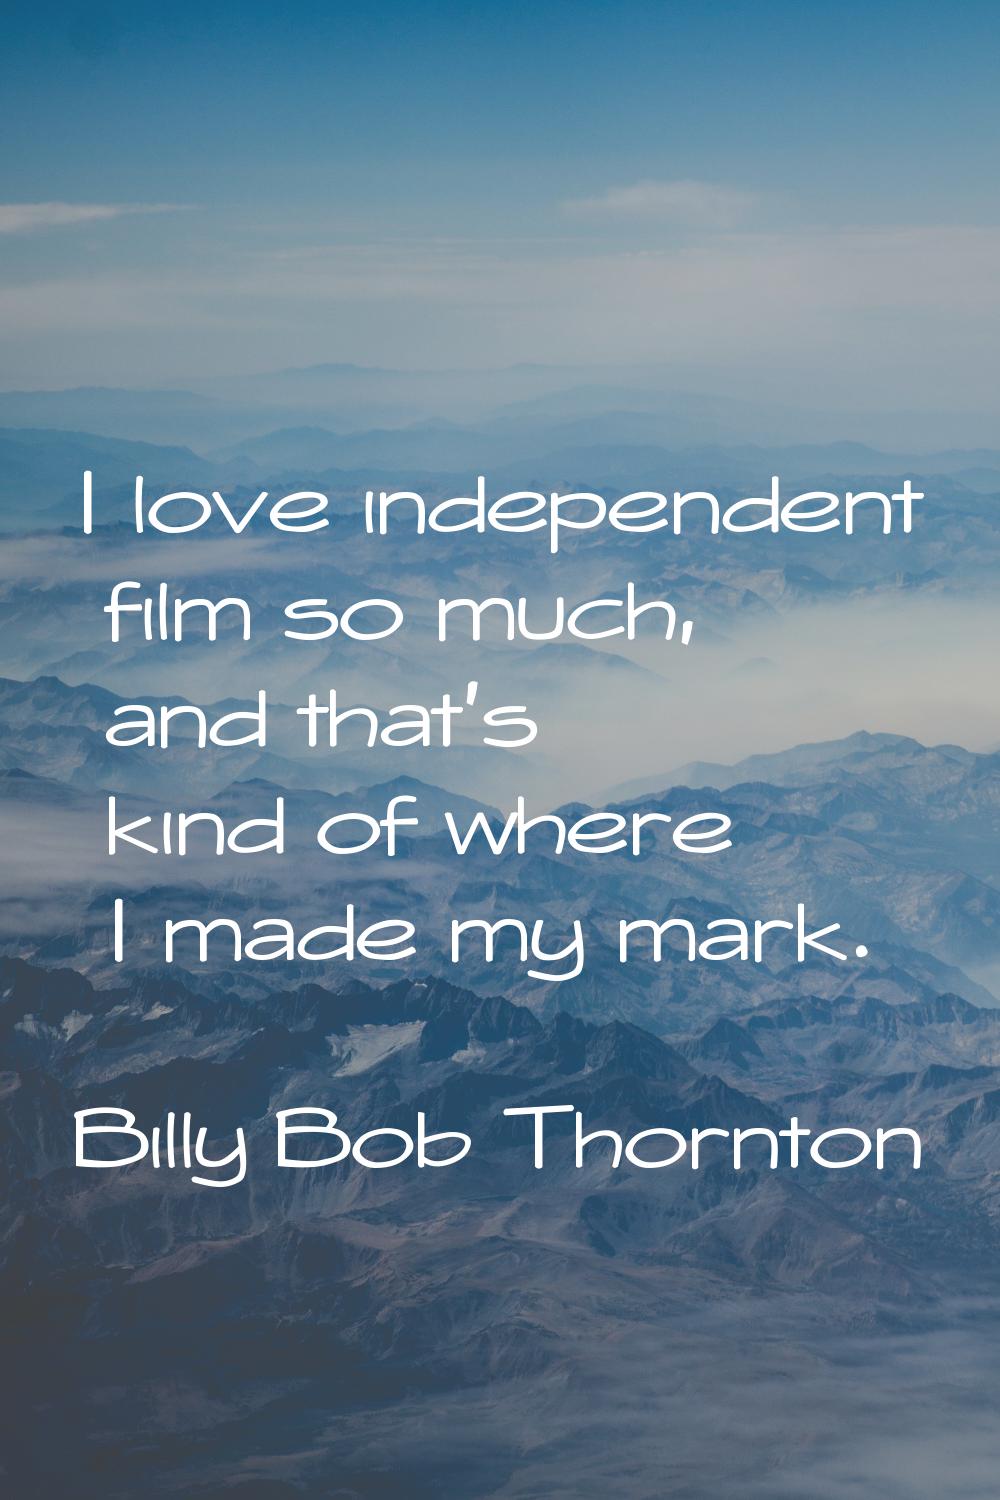 I love independent film so much, and that's kind of where I made my mark.